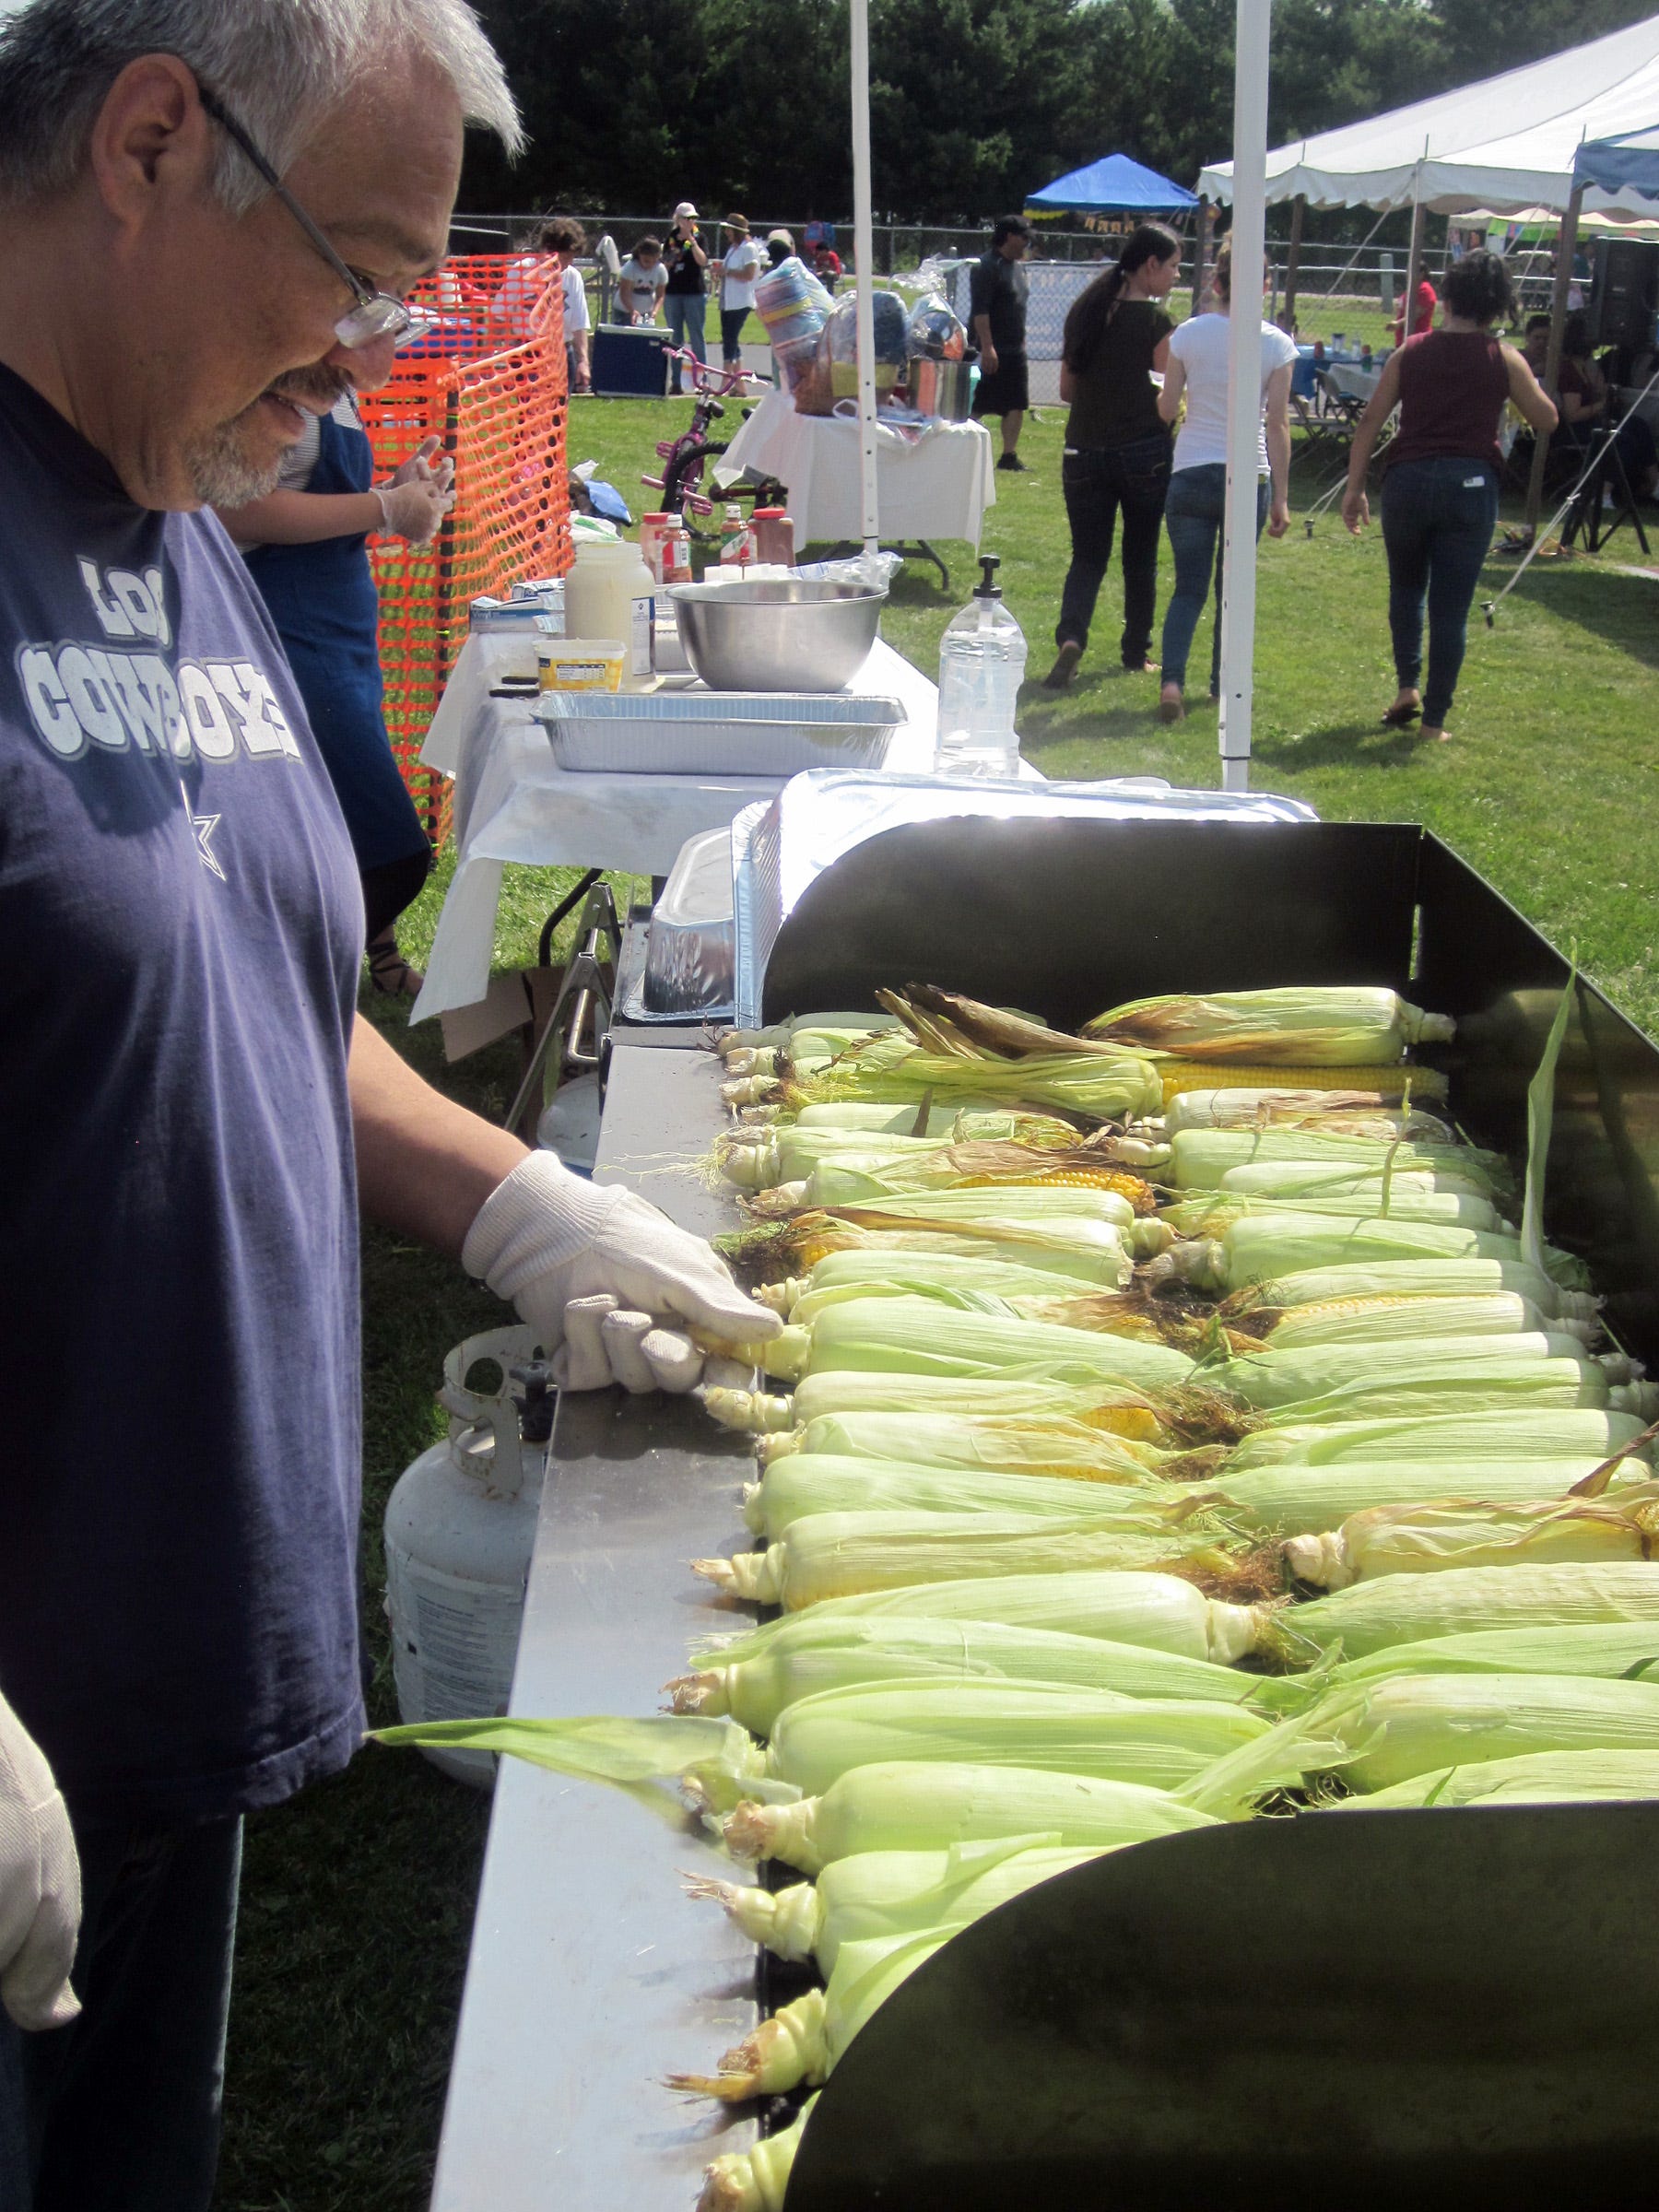 Juan Lopez, UMOS staff, prepares roasted corn for the annual UMOS annual farmworker appreciation day picnic on Aug. 6 in Berlin.